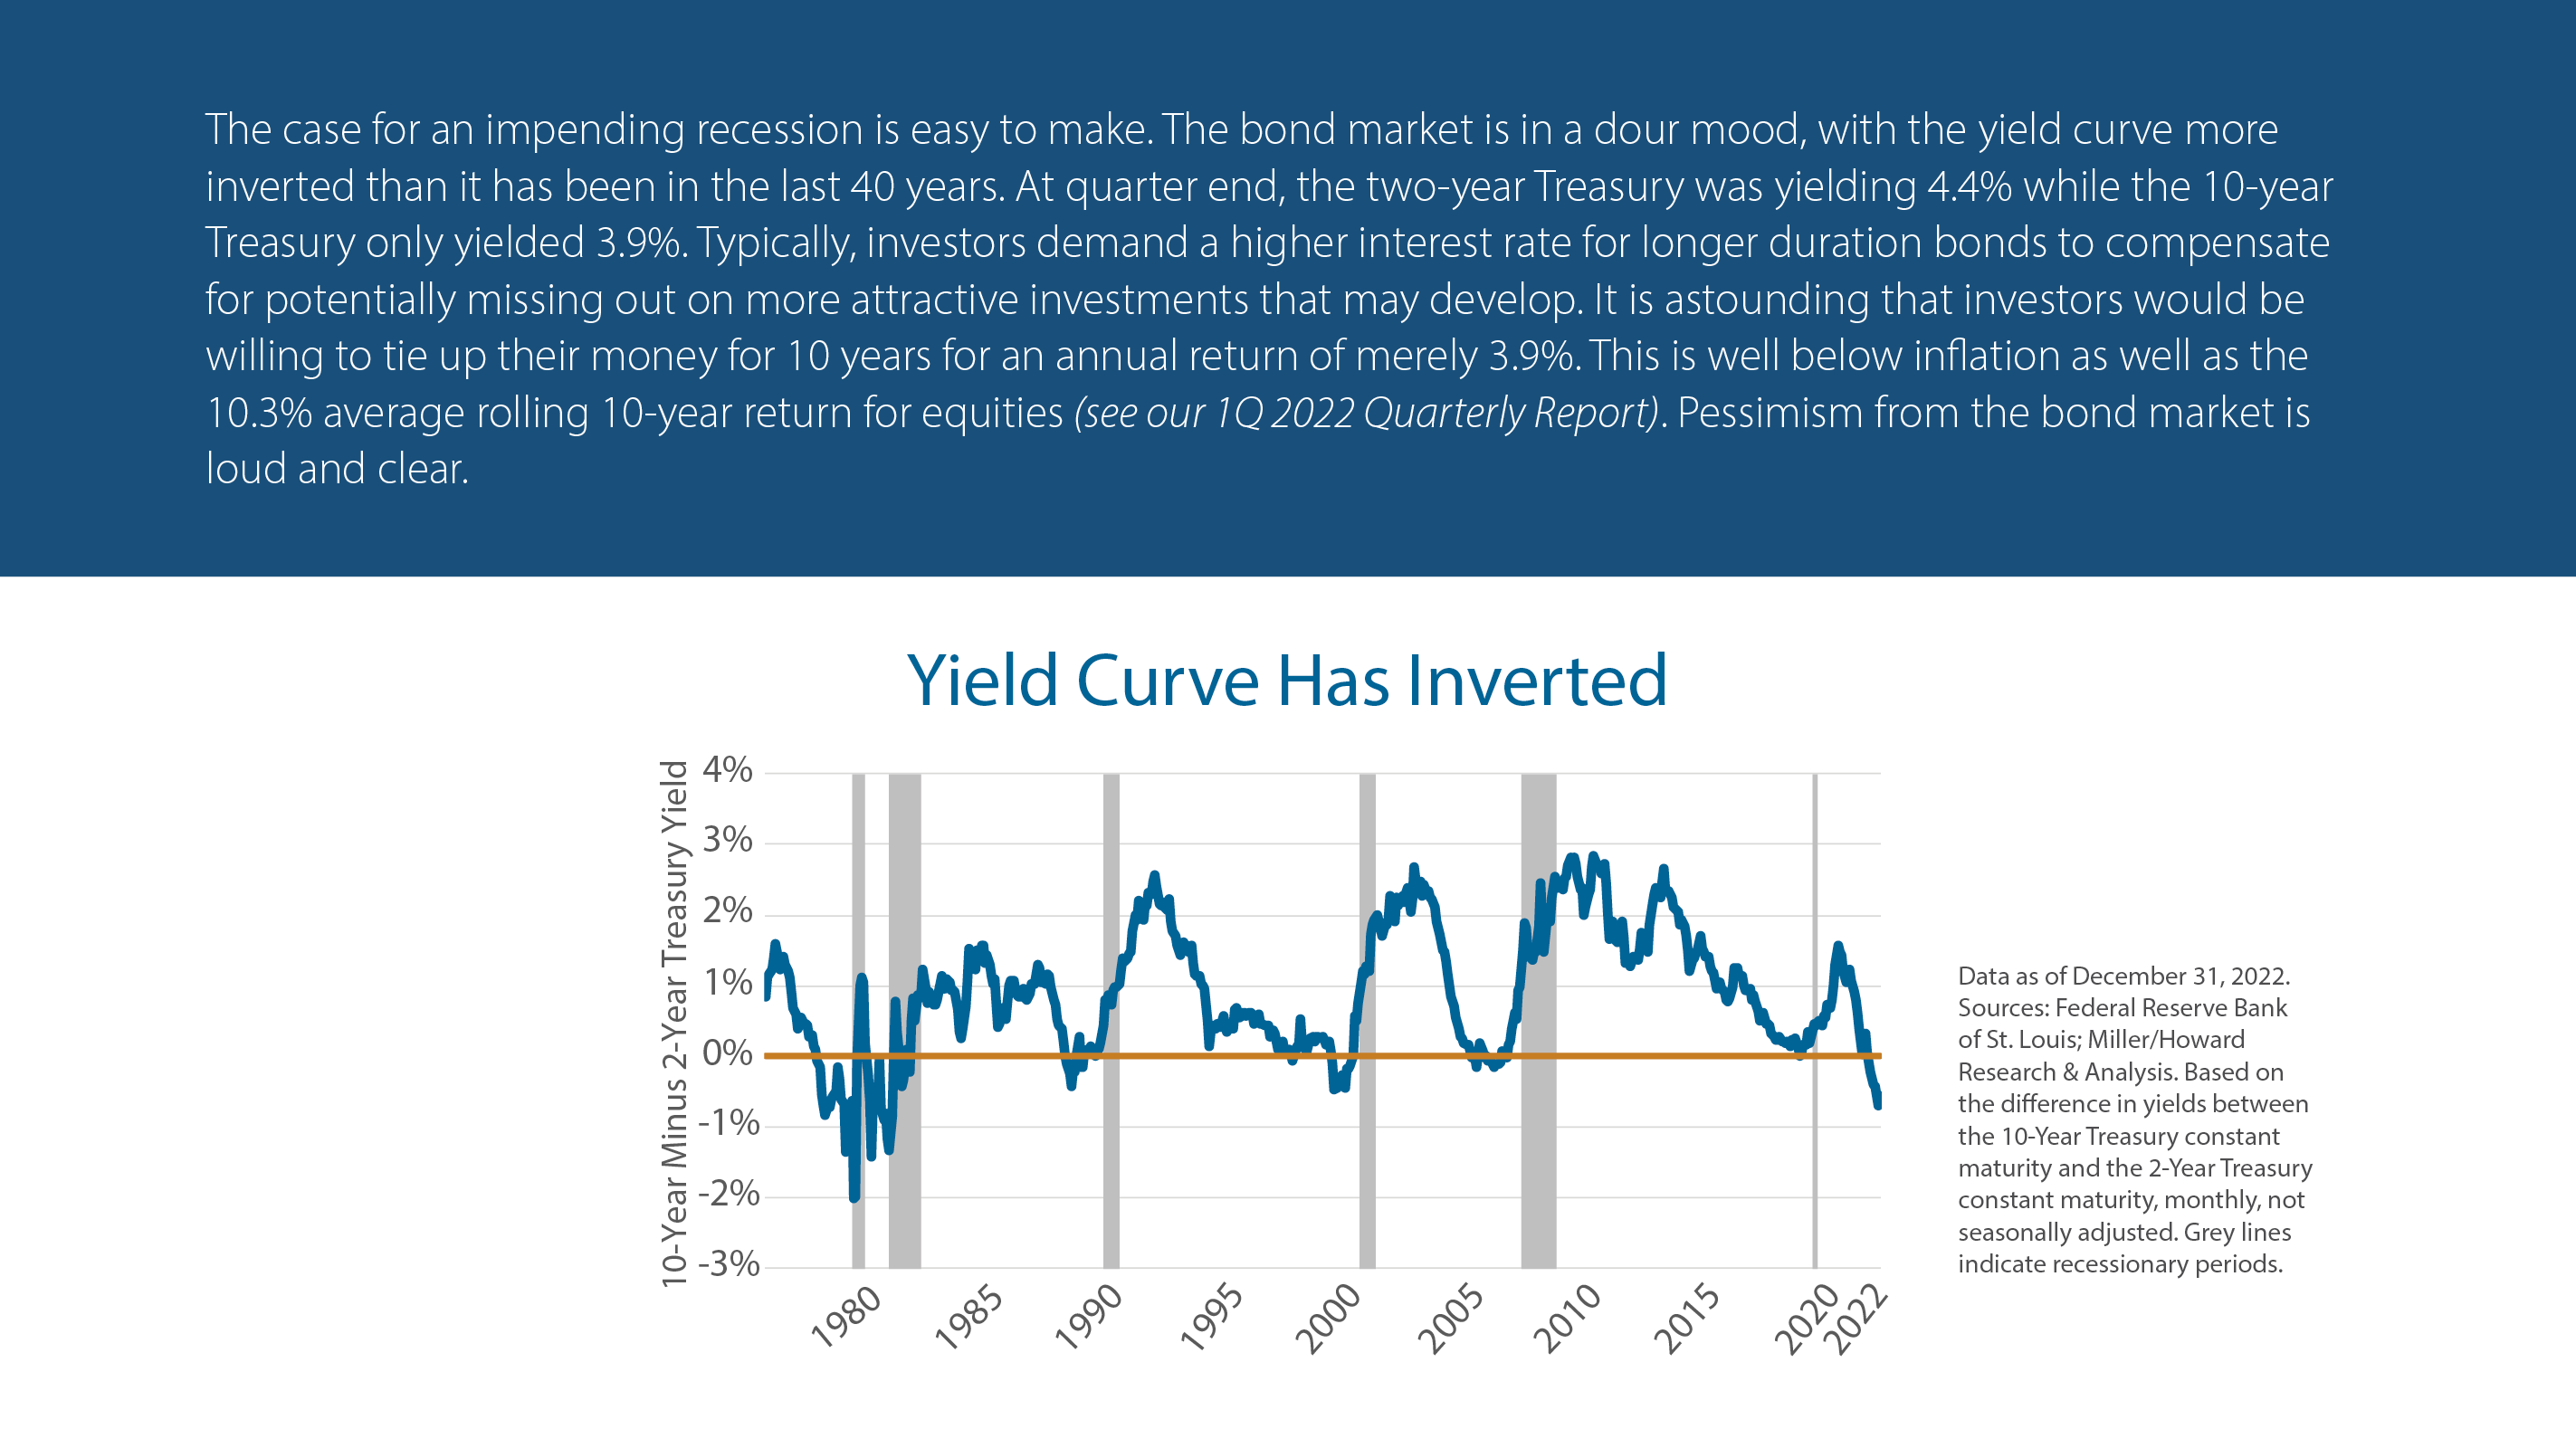 Yield Curve Has Inverted